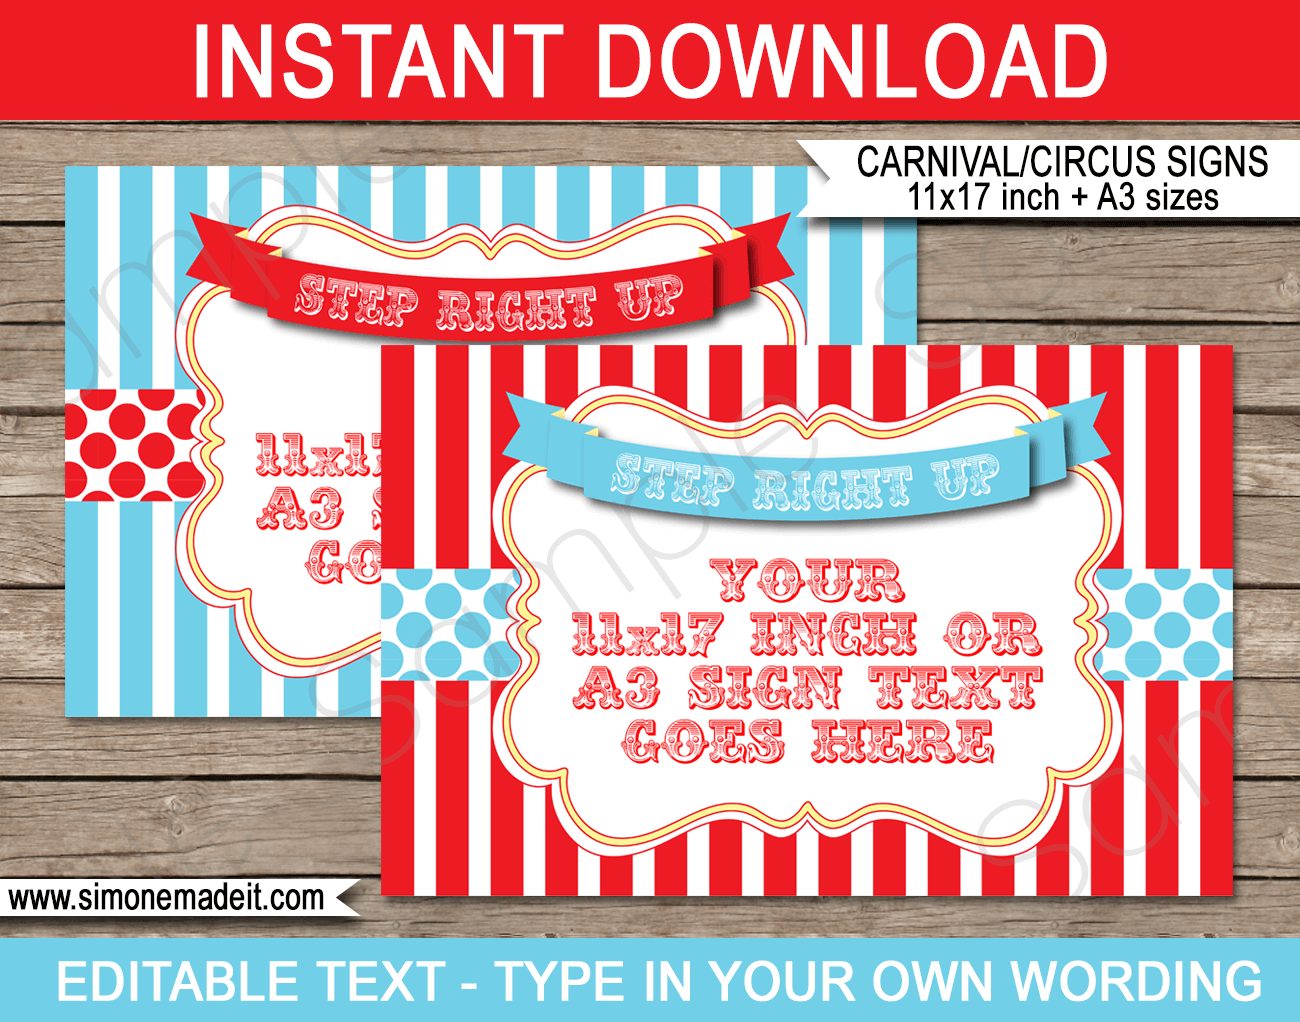 Printable Red & Aqua Circus Game Signs | Editable Text | Editable DIY Template | Carnival Theme Party Decorations | $4.00 Instant Download via SIMONEmadeit.com